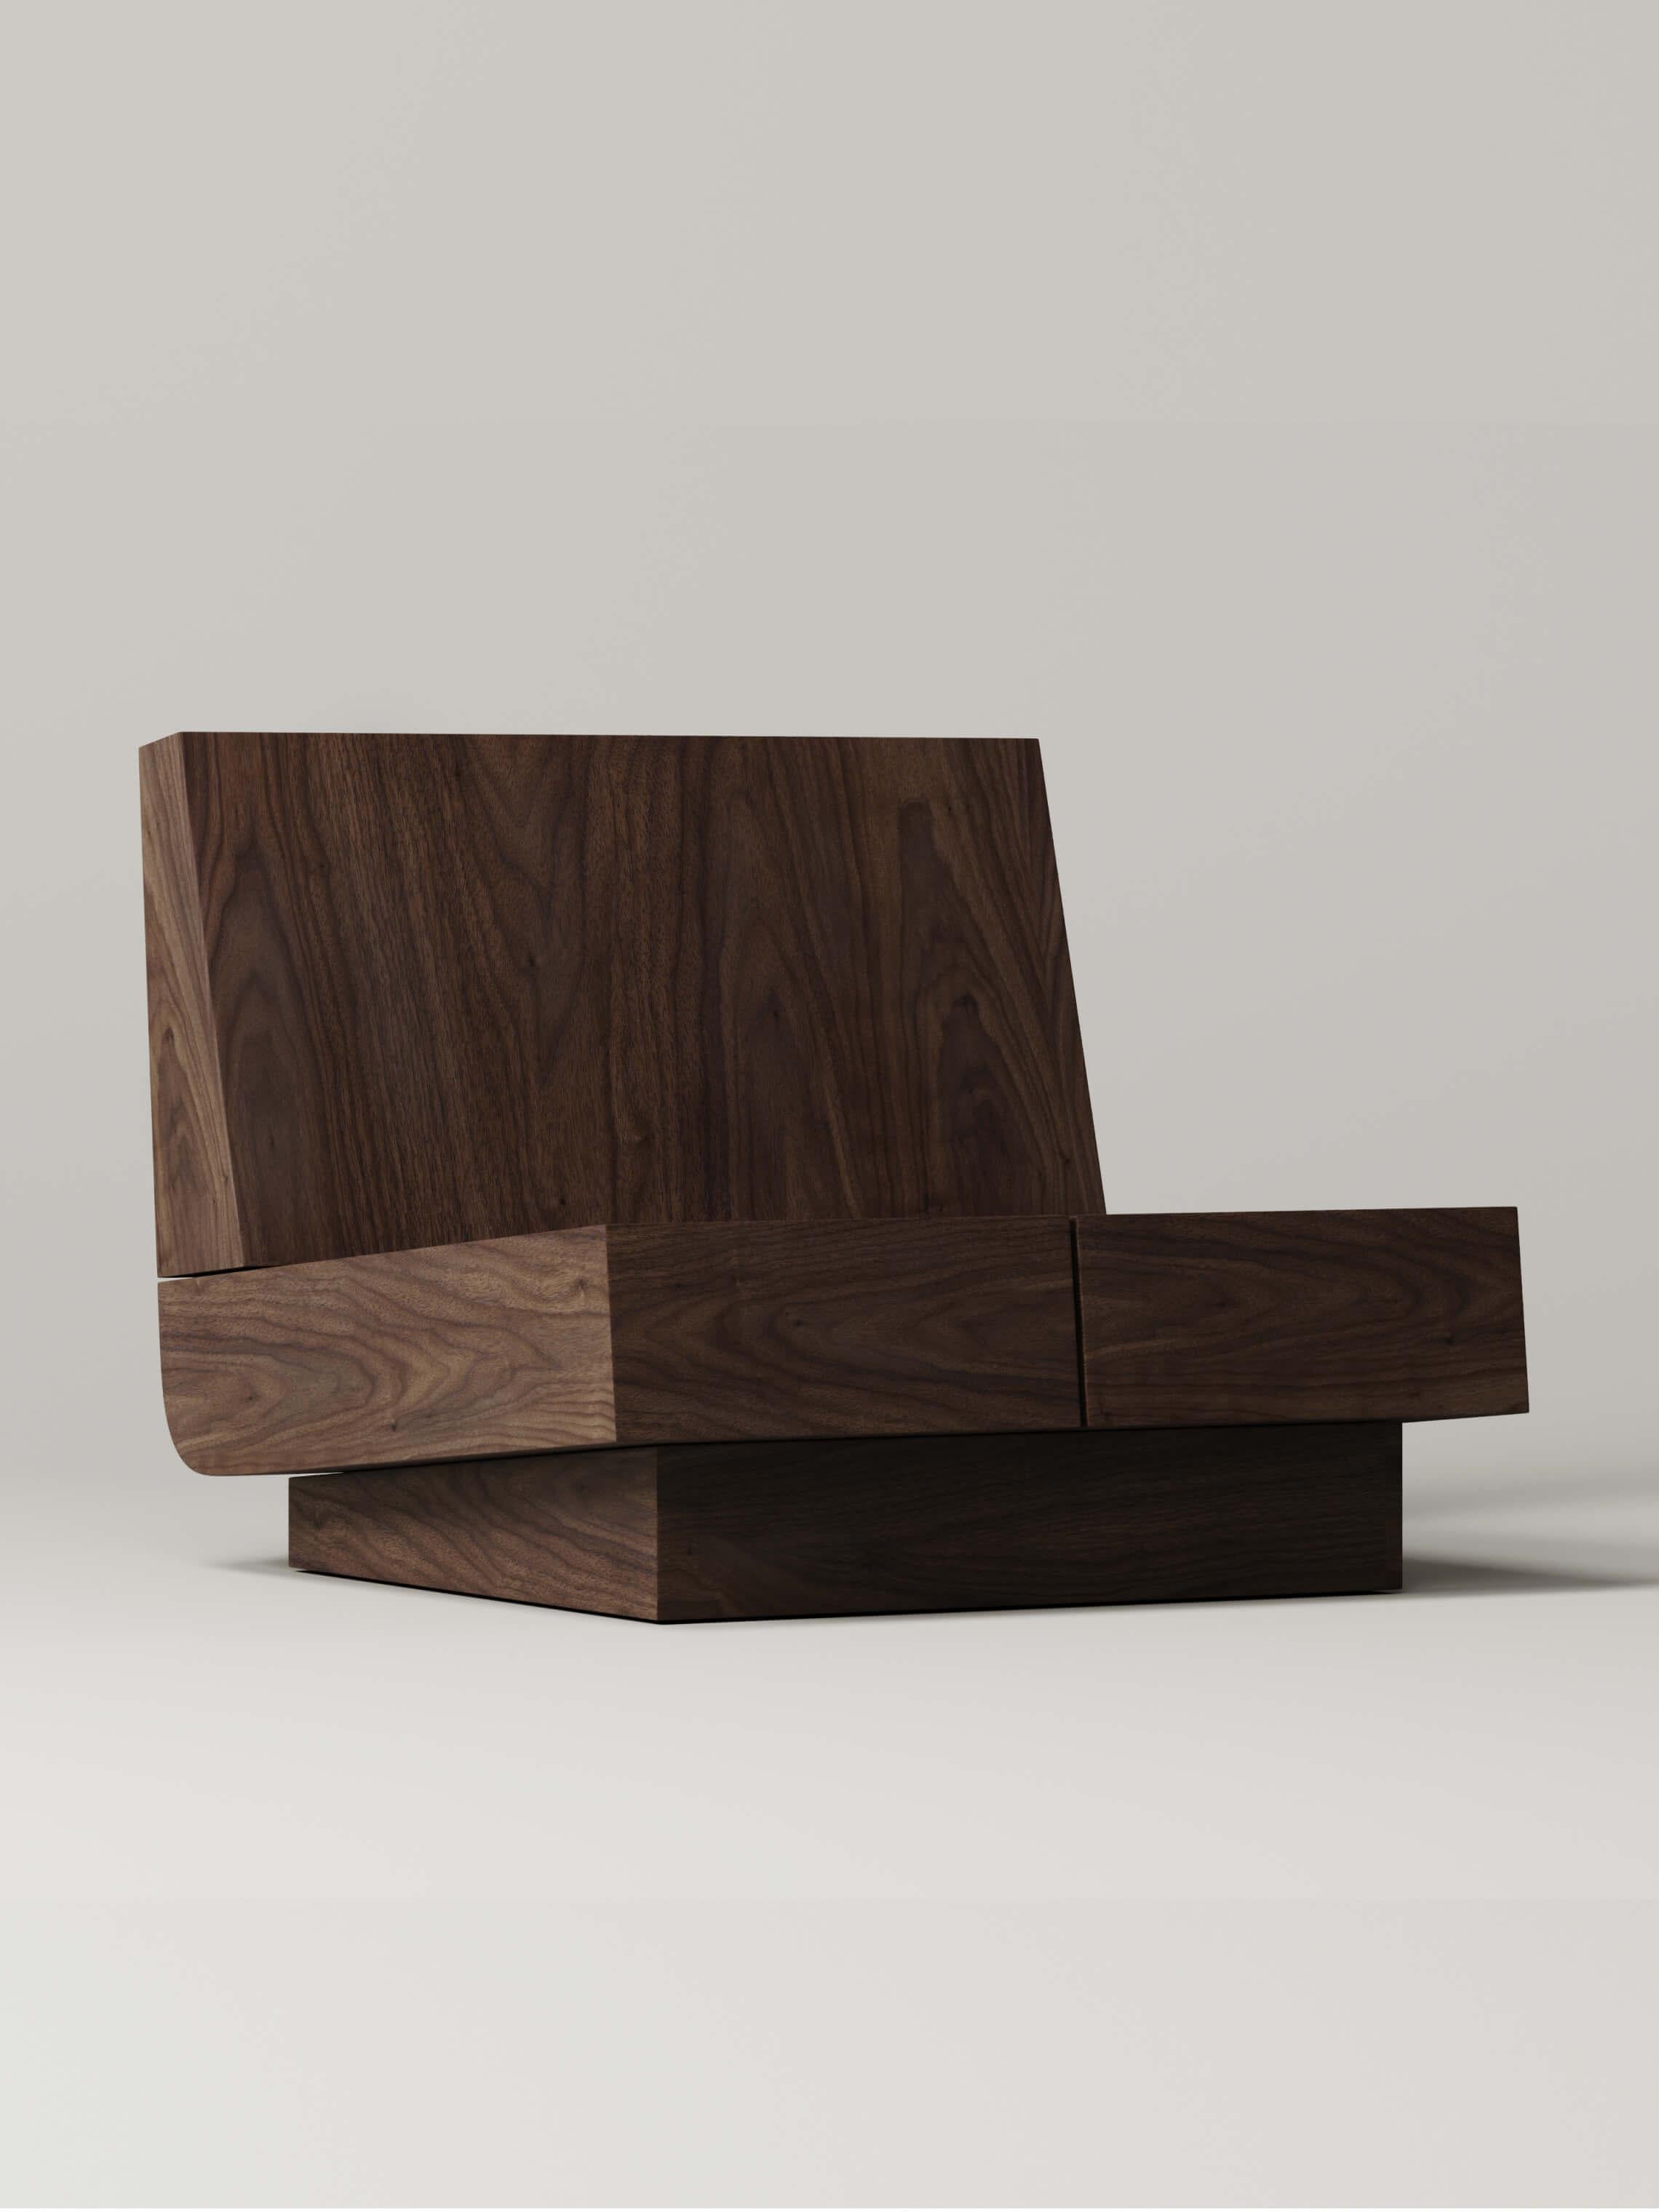 M_007 Lounge Chair by Monolith Studio
Signed and Numbered.
Dimensions: D 70 x W 66 x H 60 cm.
Materials: Walnut. 

Available in travertine, walnut, white oak and lava rock.  Please contact us. 

Monolith, founded in 2022 by Marc Personick, leans on